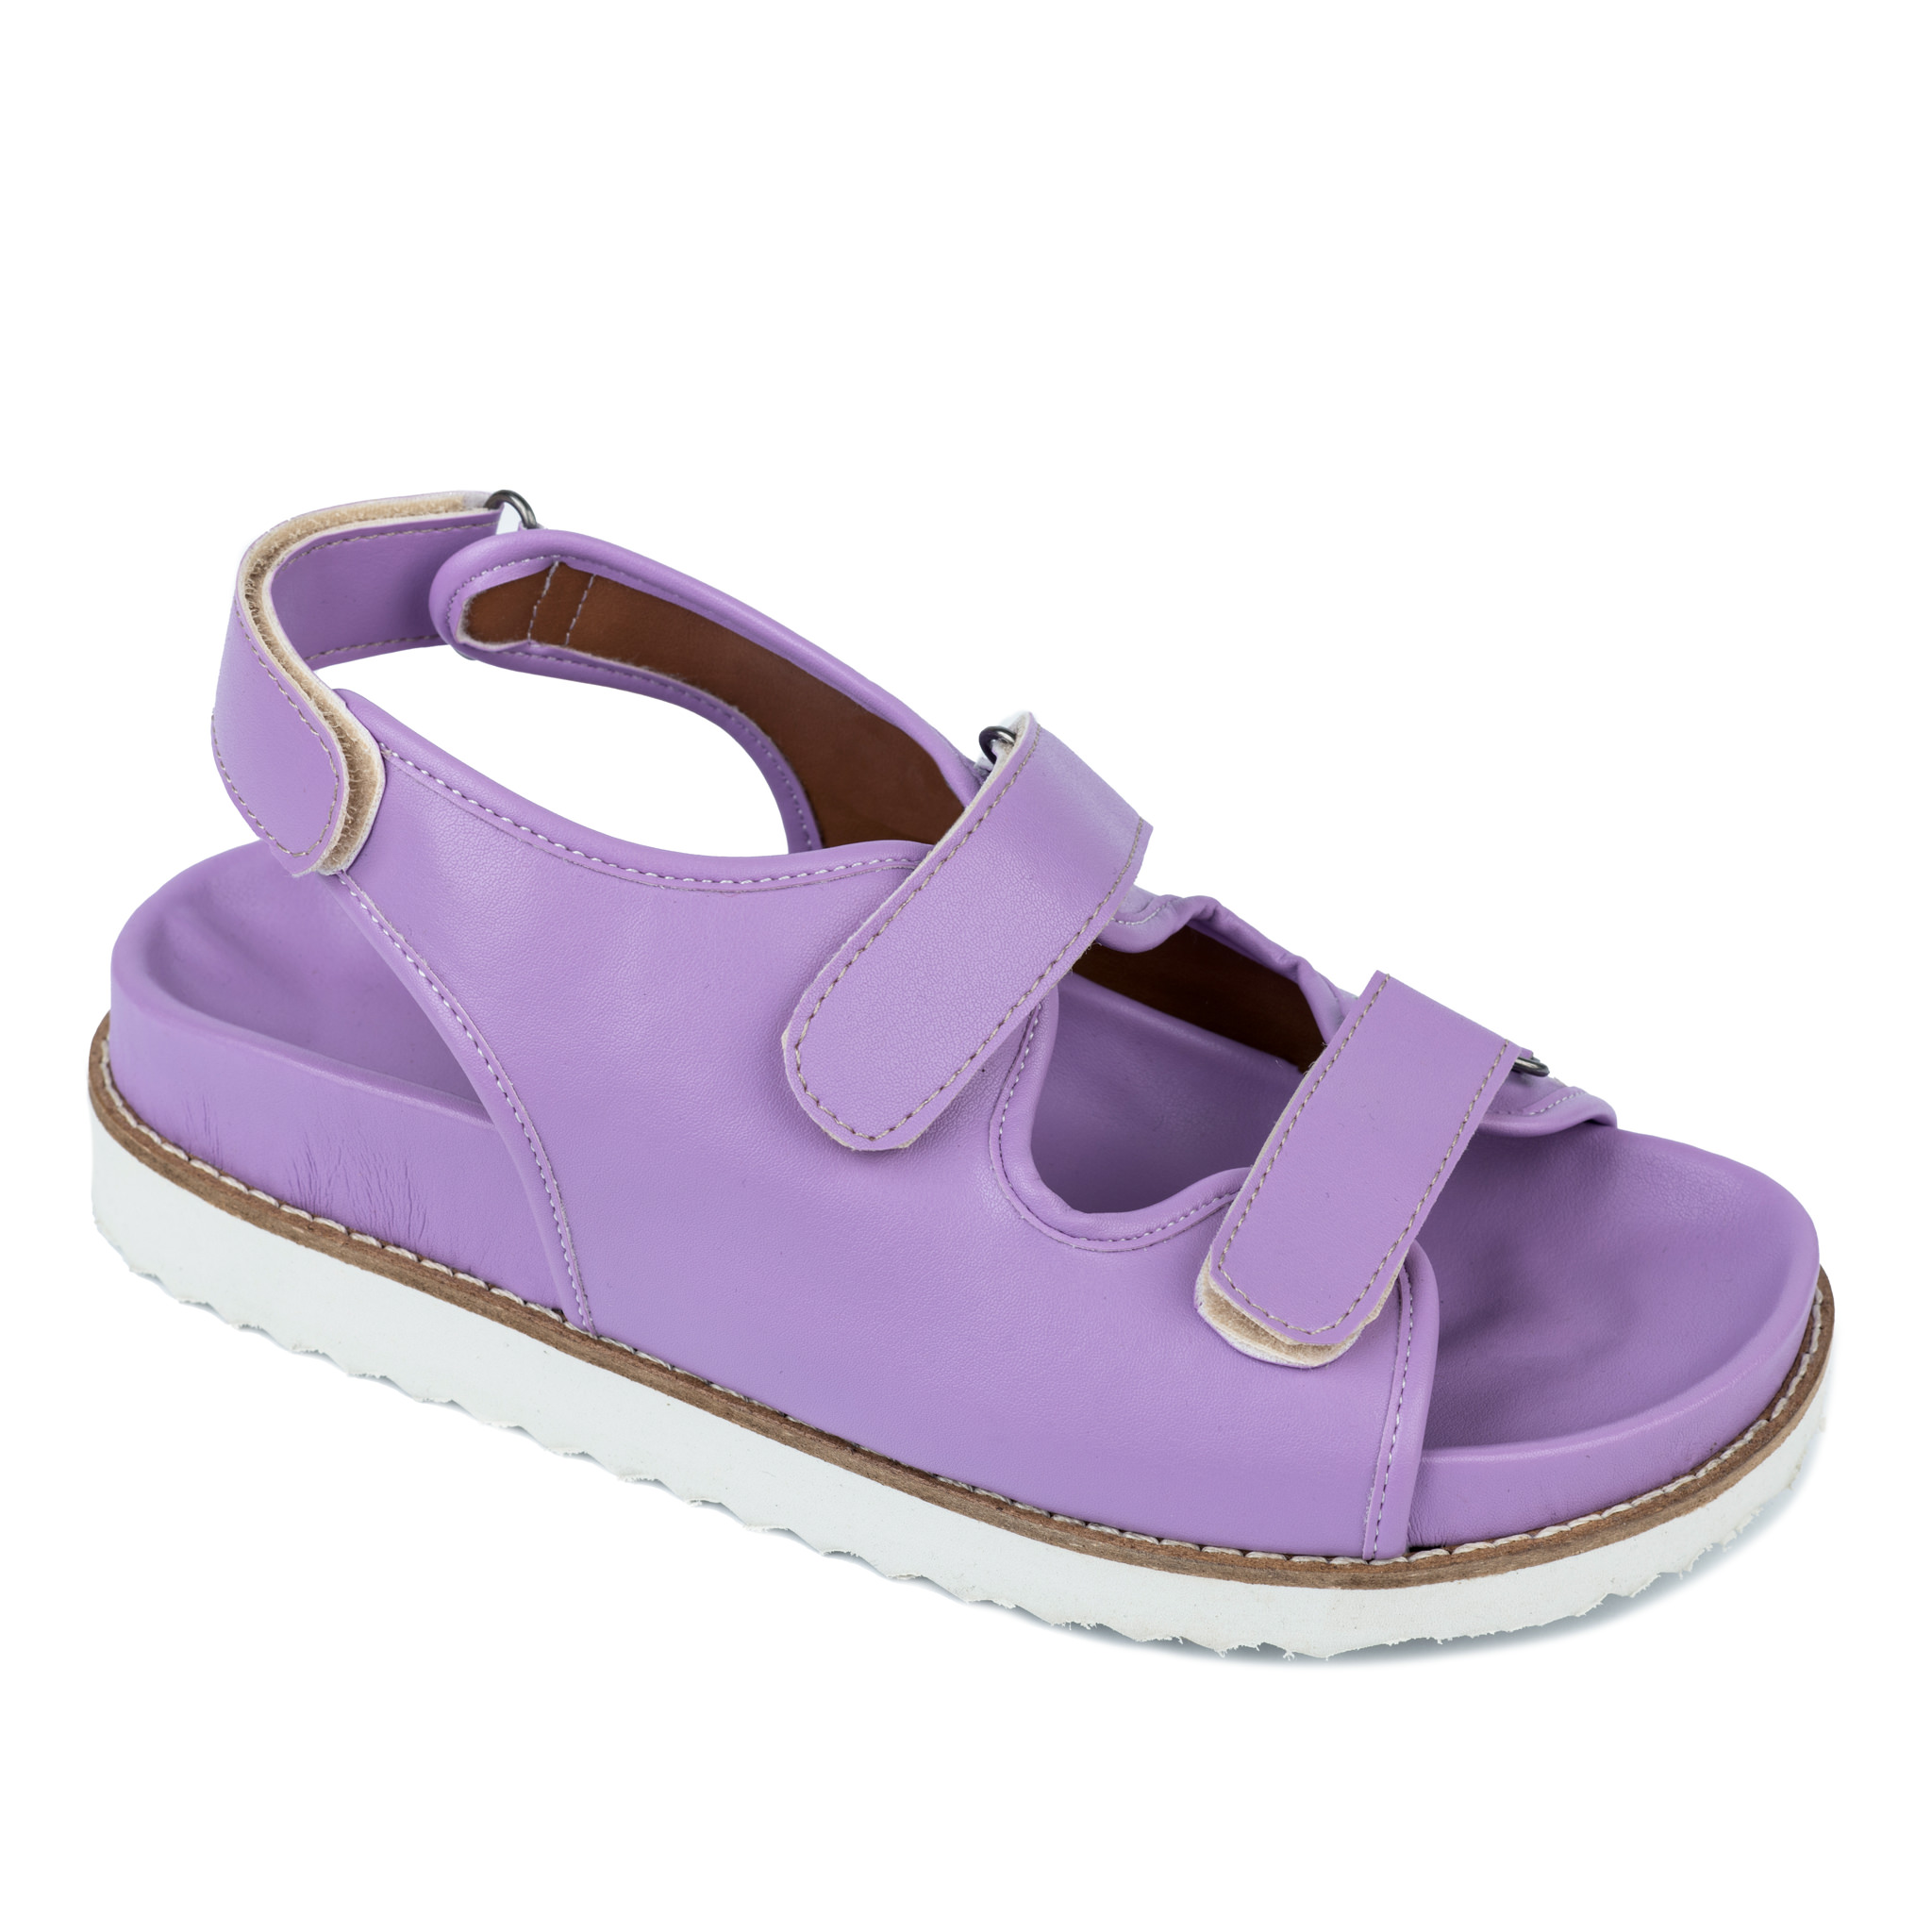 SPORT FLAT SANDALS WITH VELCRO BAND - PURPLE